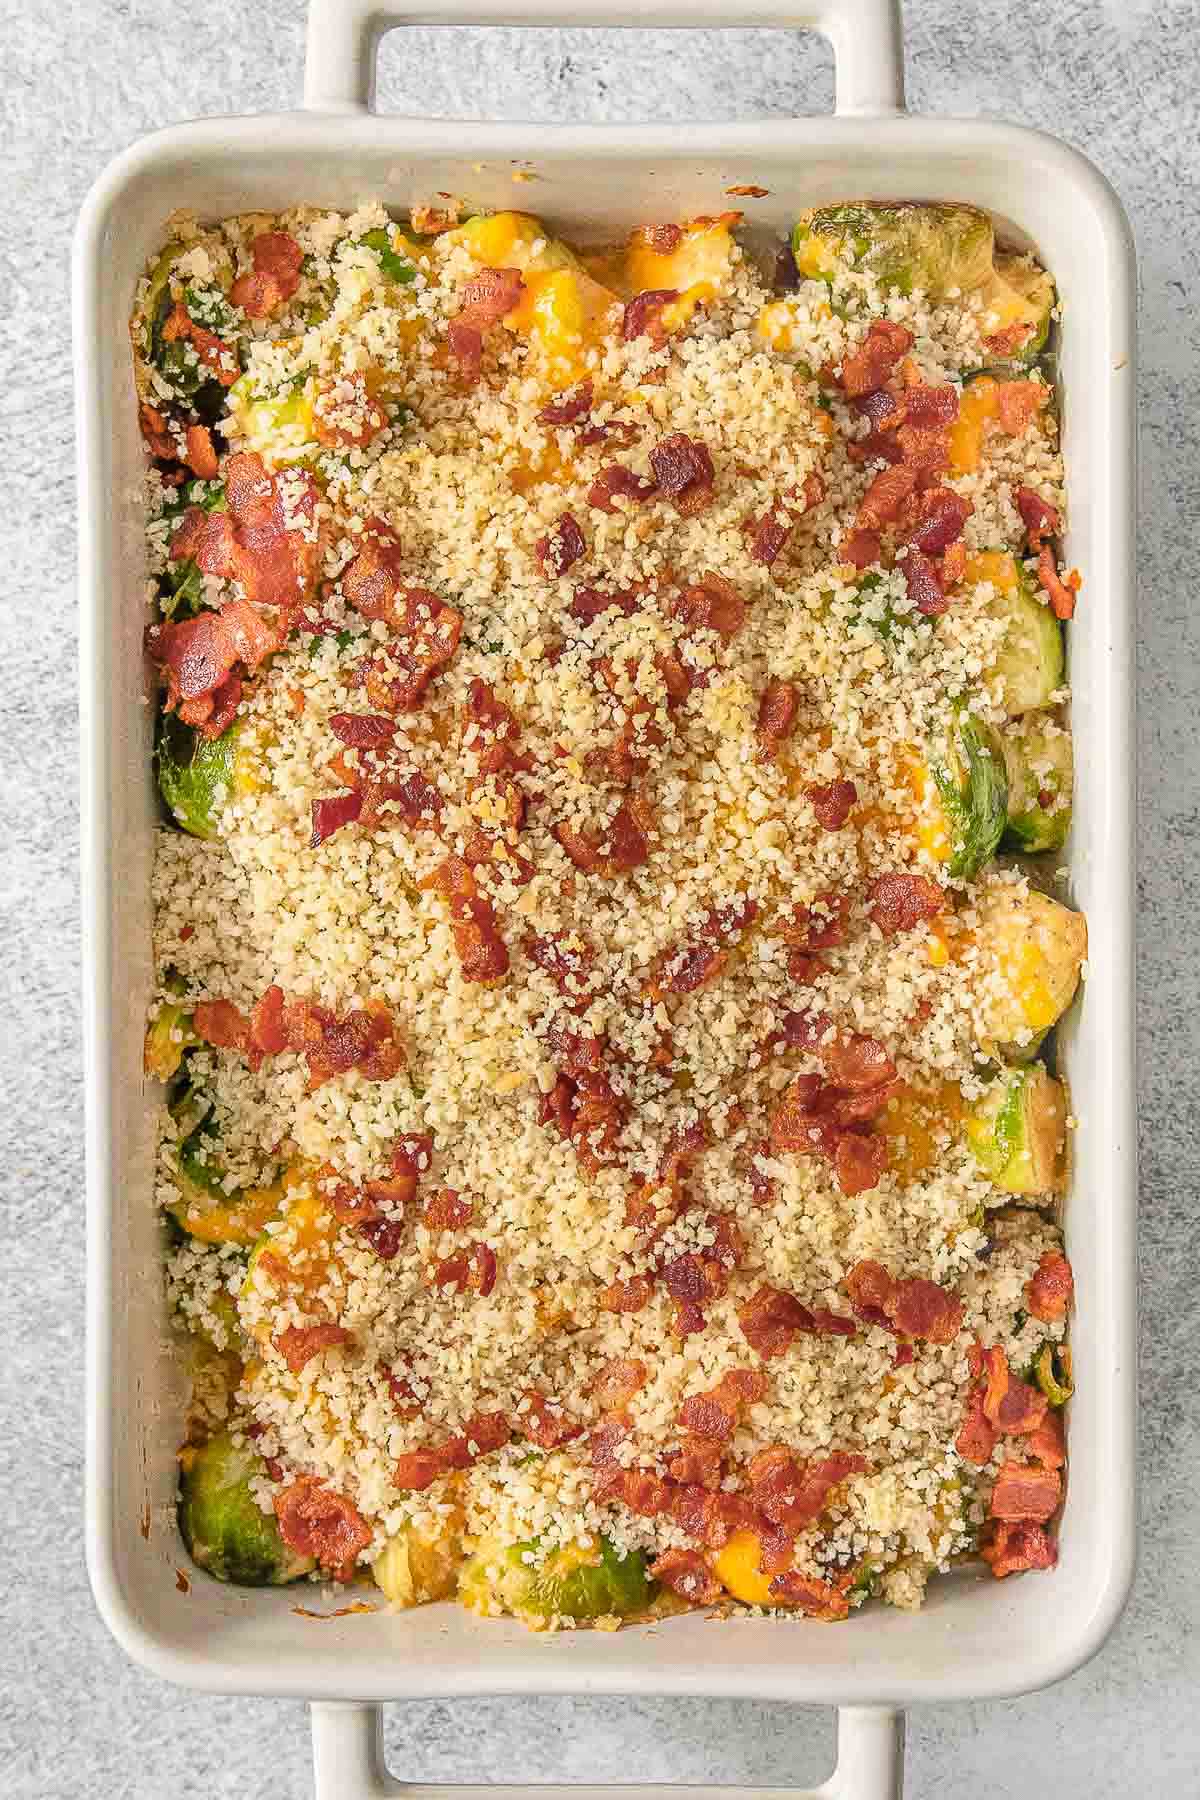 Brussel sprouts casserole in a white baking dish topped with bacon and breadcrumbs.